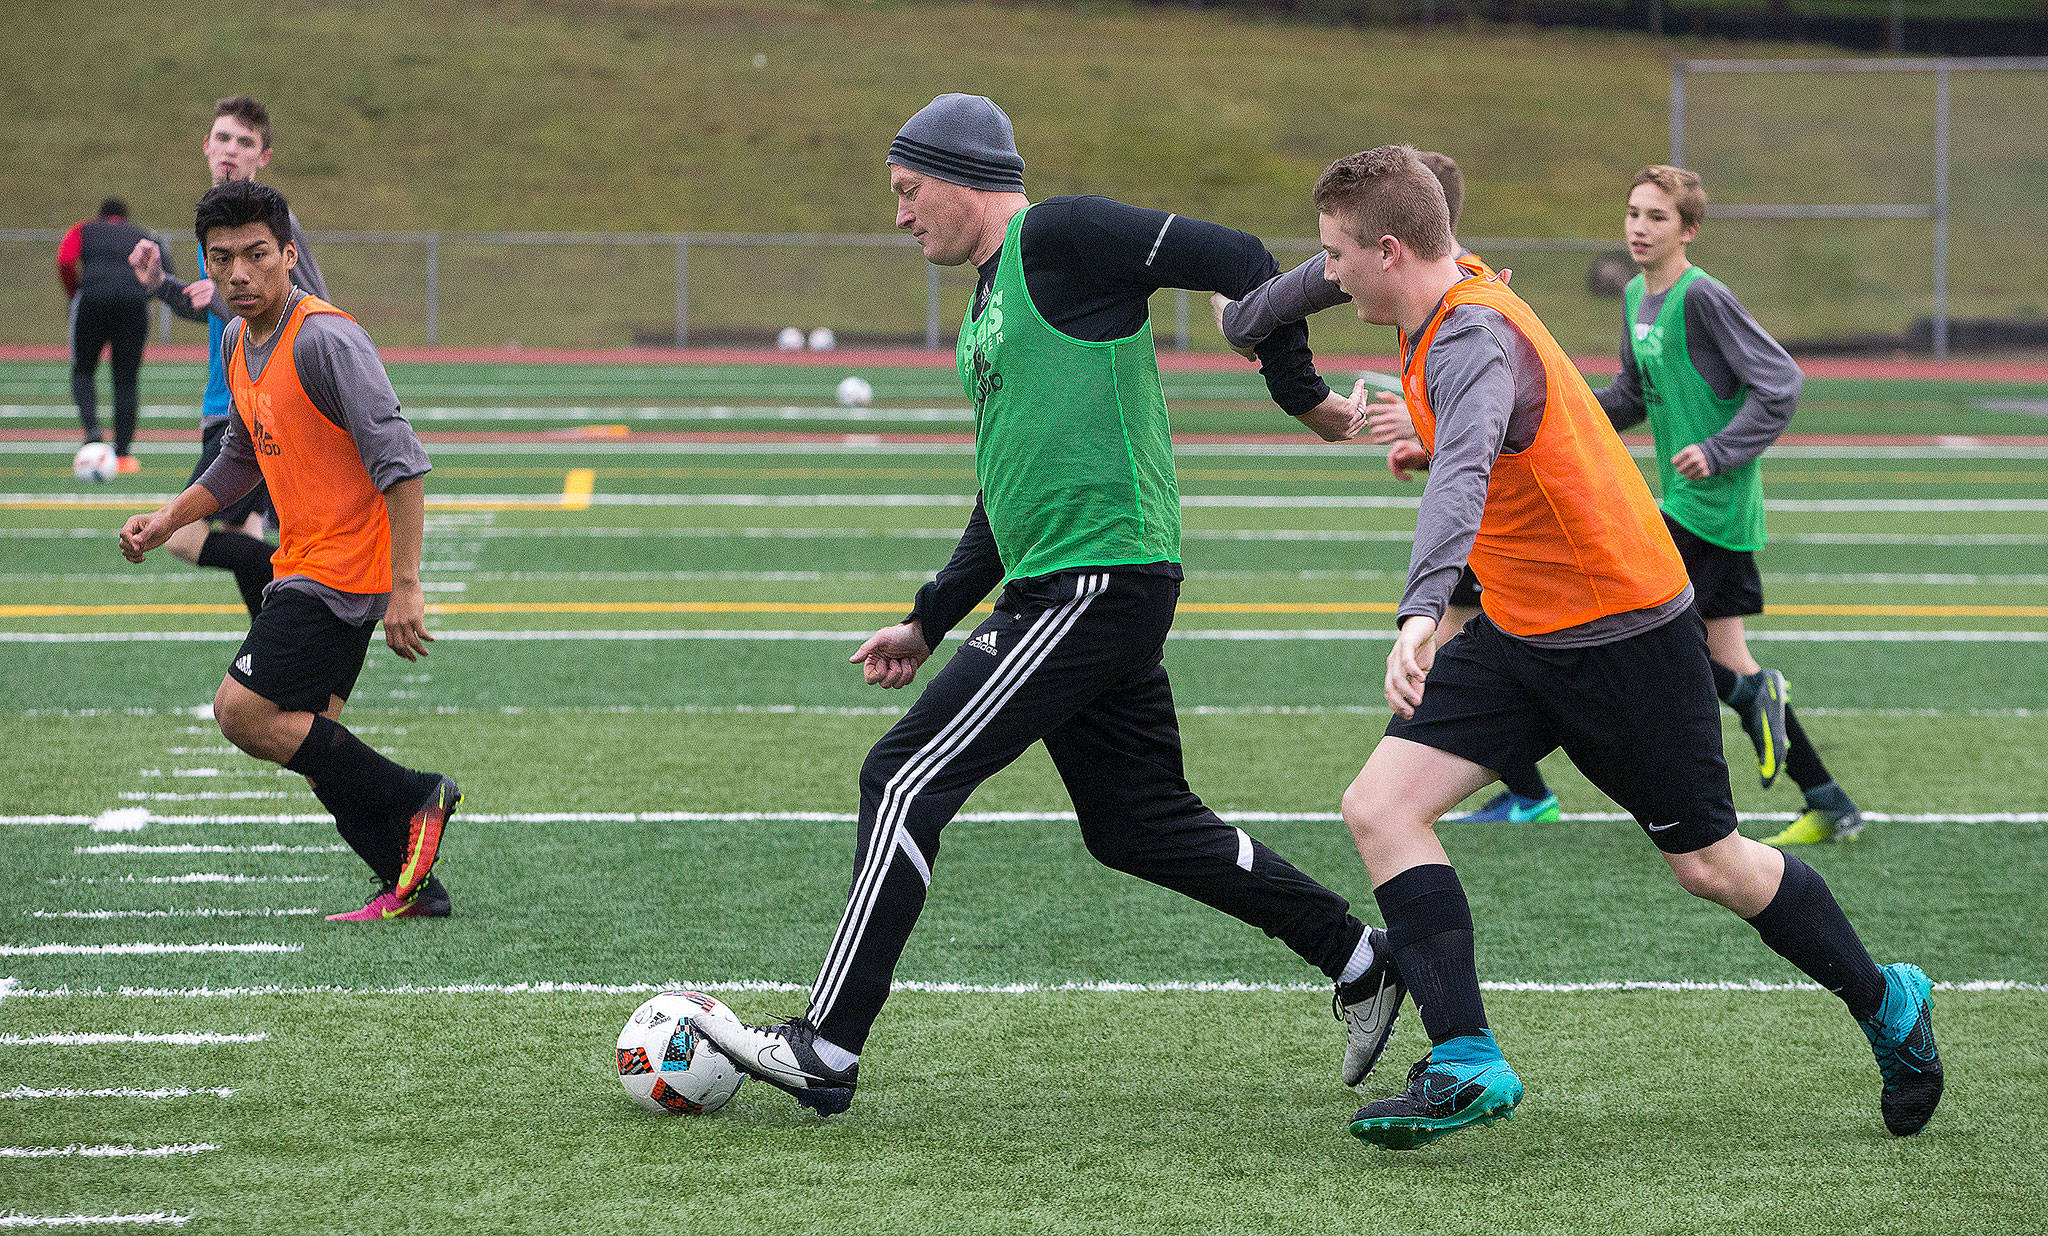 Snohomish boys soccer coach Matt Raney (center) participates in a drill with the team during practice on Monday. Raney takes over this season for Dan Pingrey, who coached the varsity team for 18 years. (Andy Bronson / The Herald)